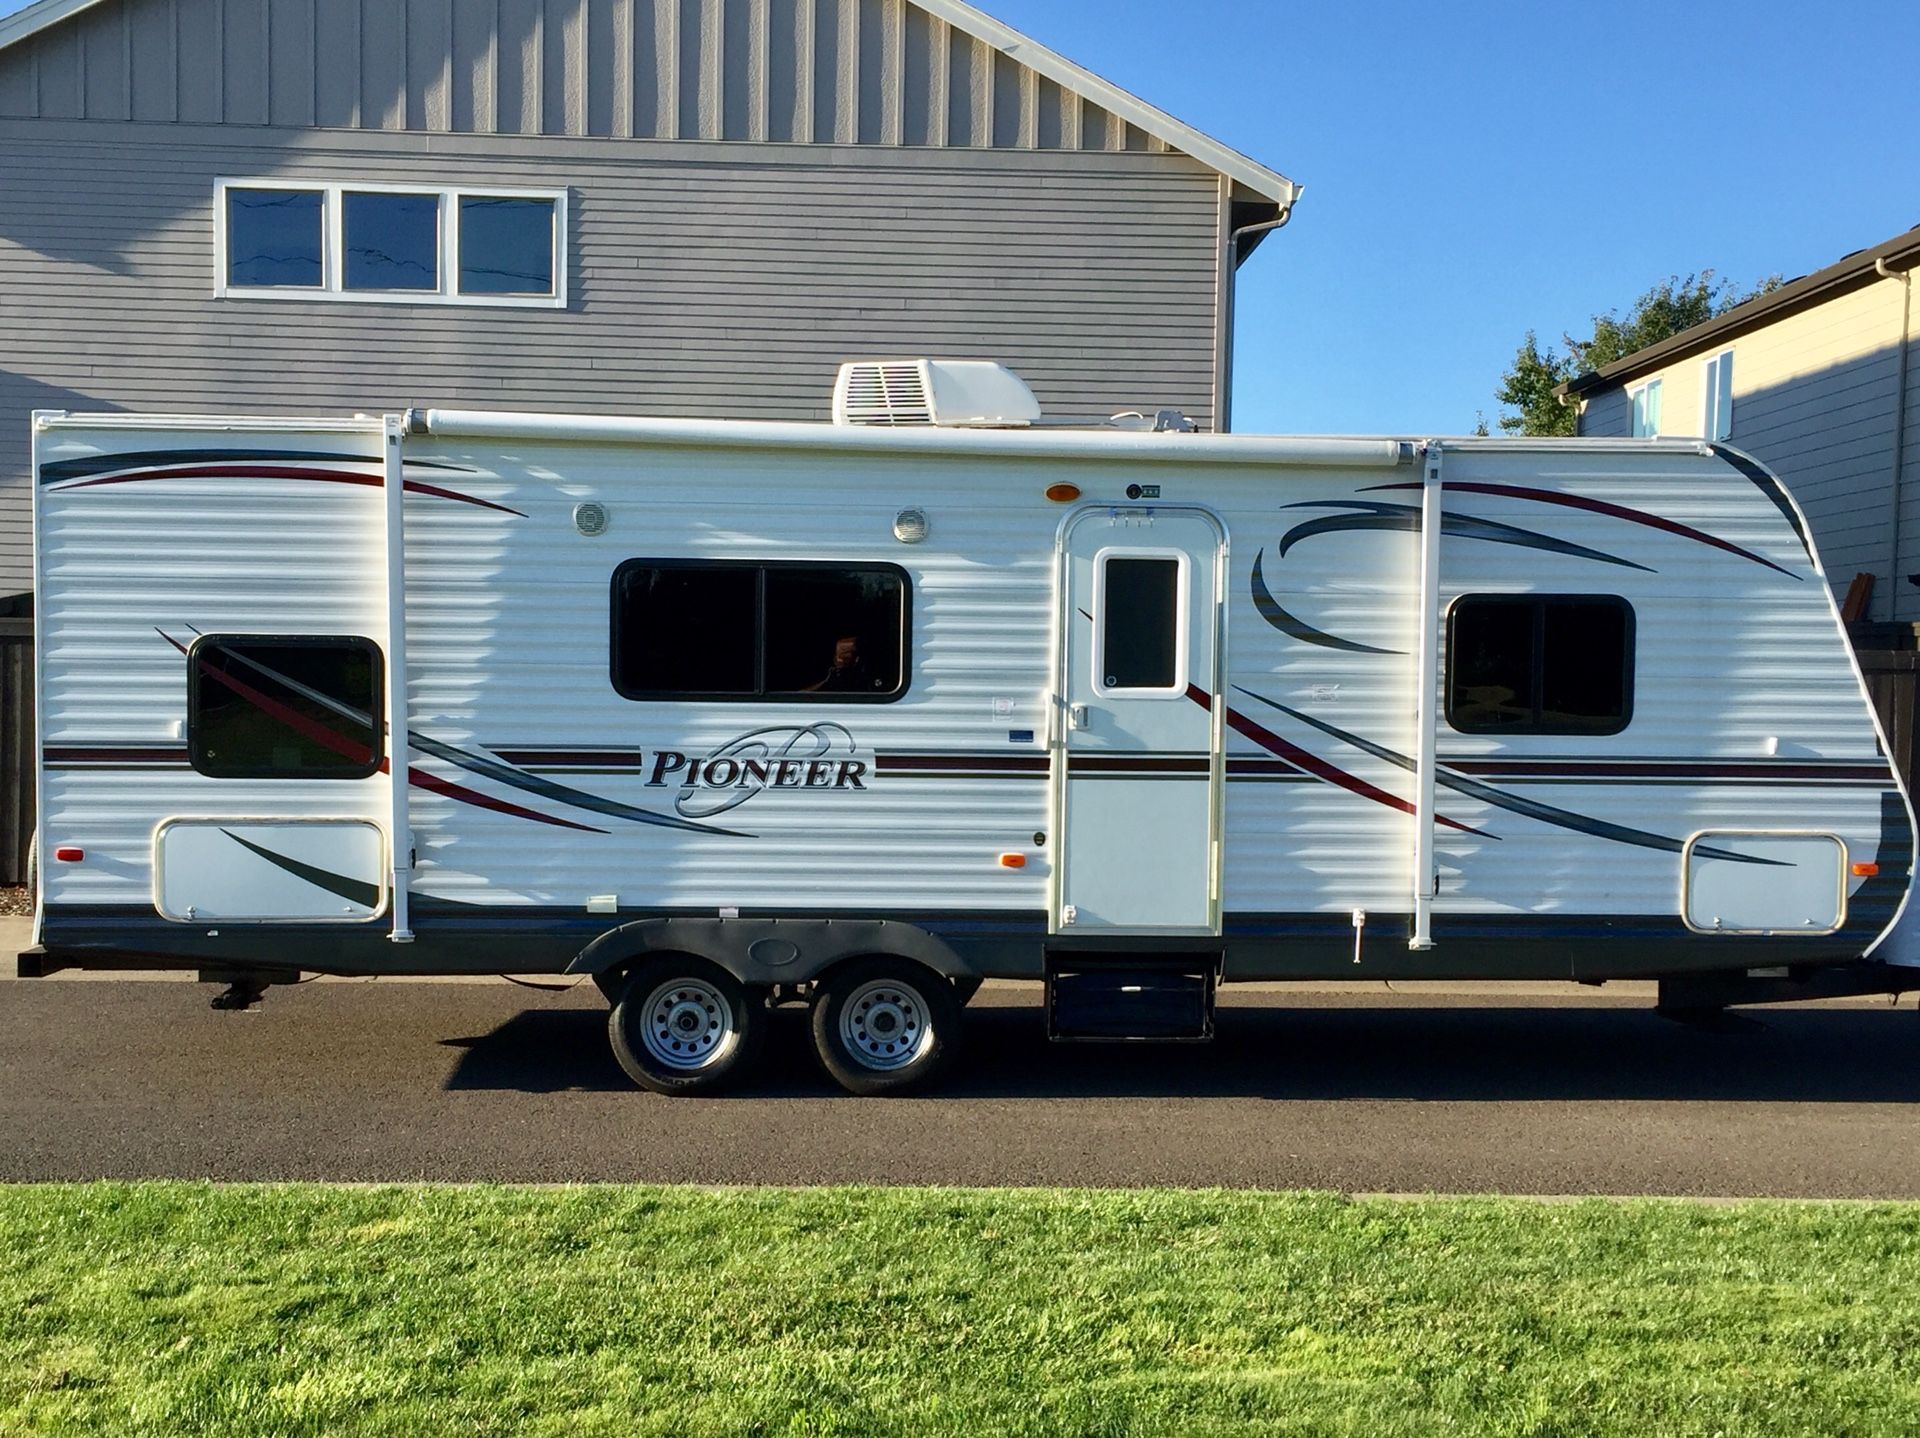 2013 Pioneer travel trailer 26 foot must see makes it easy to travel